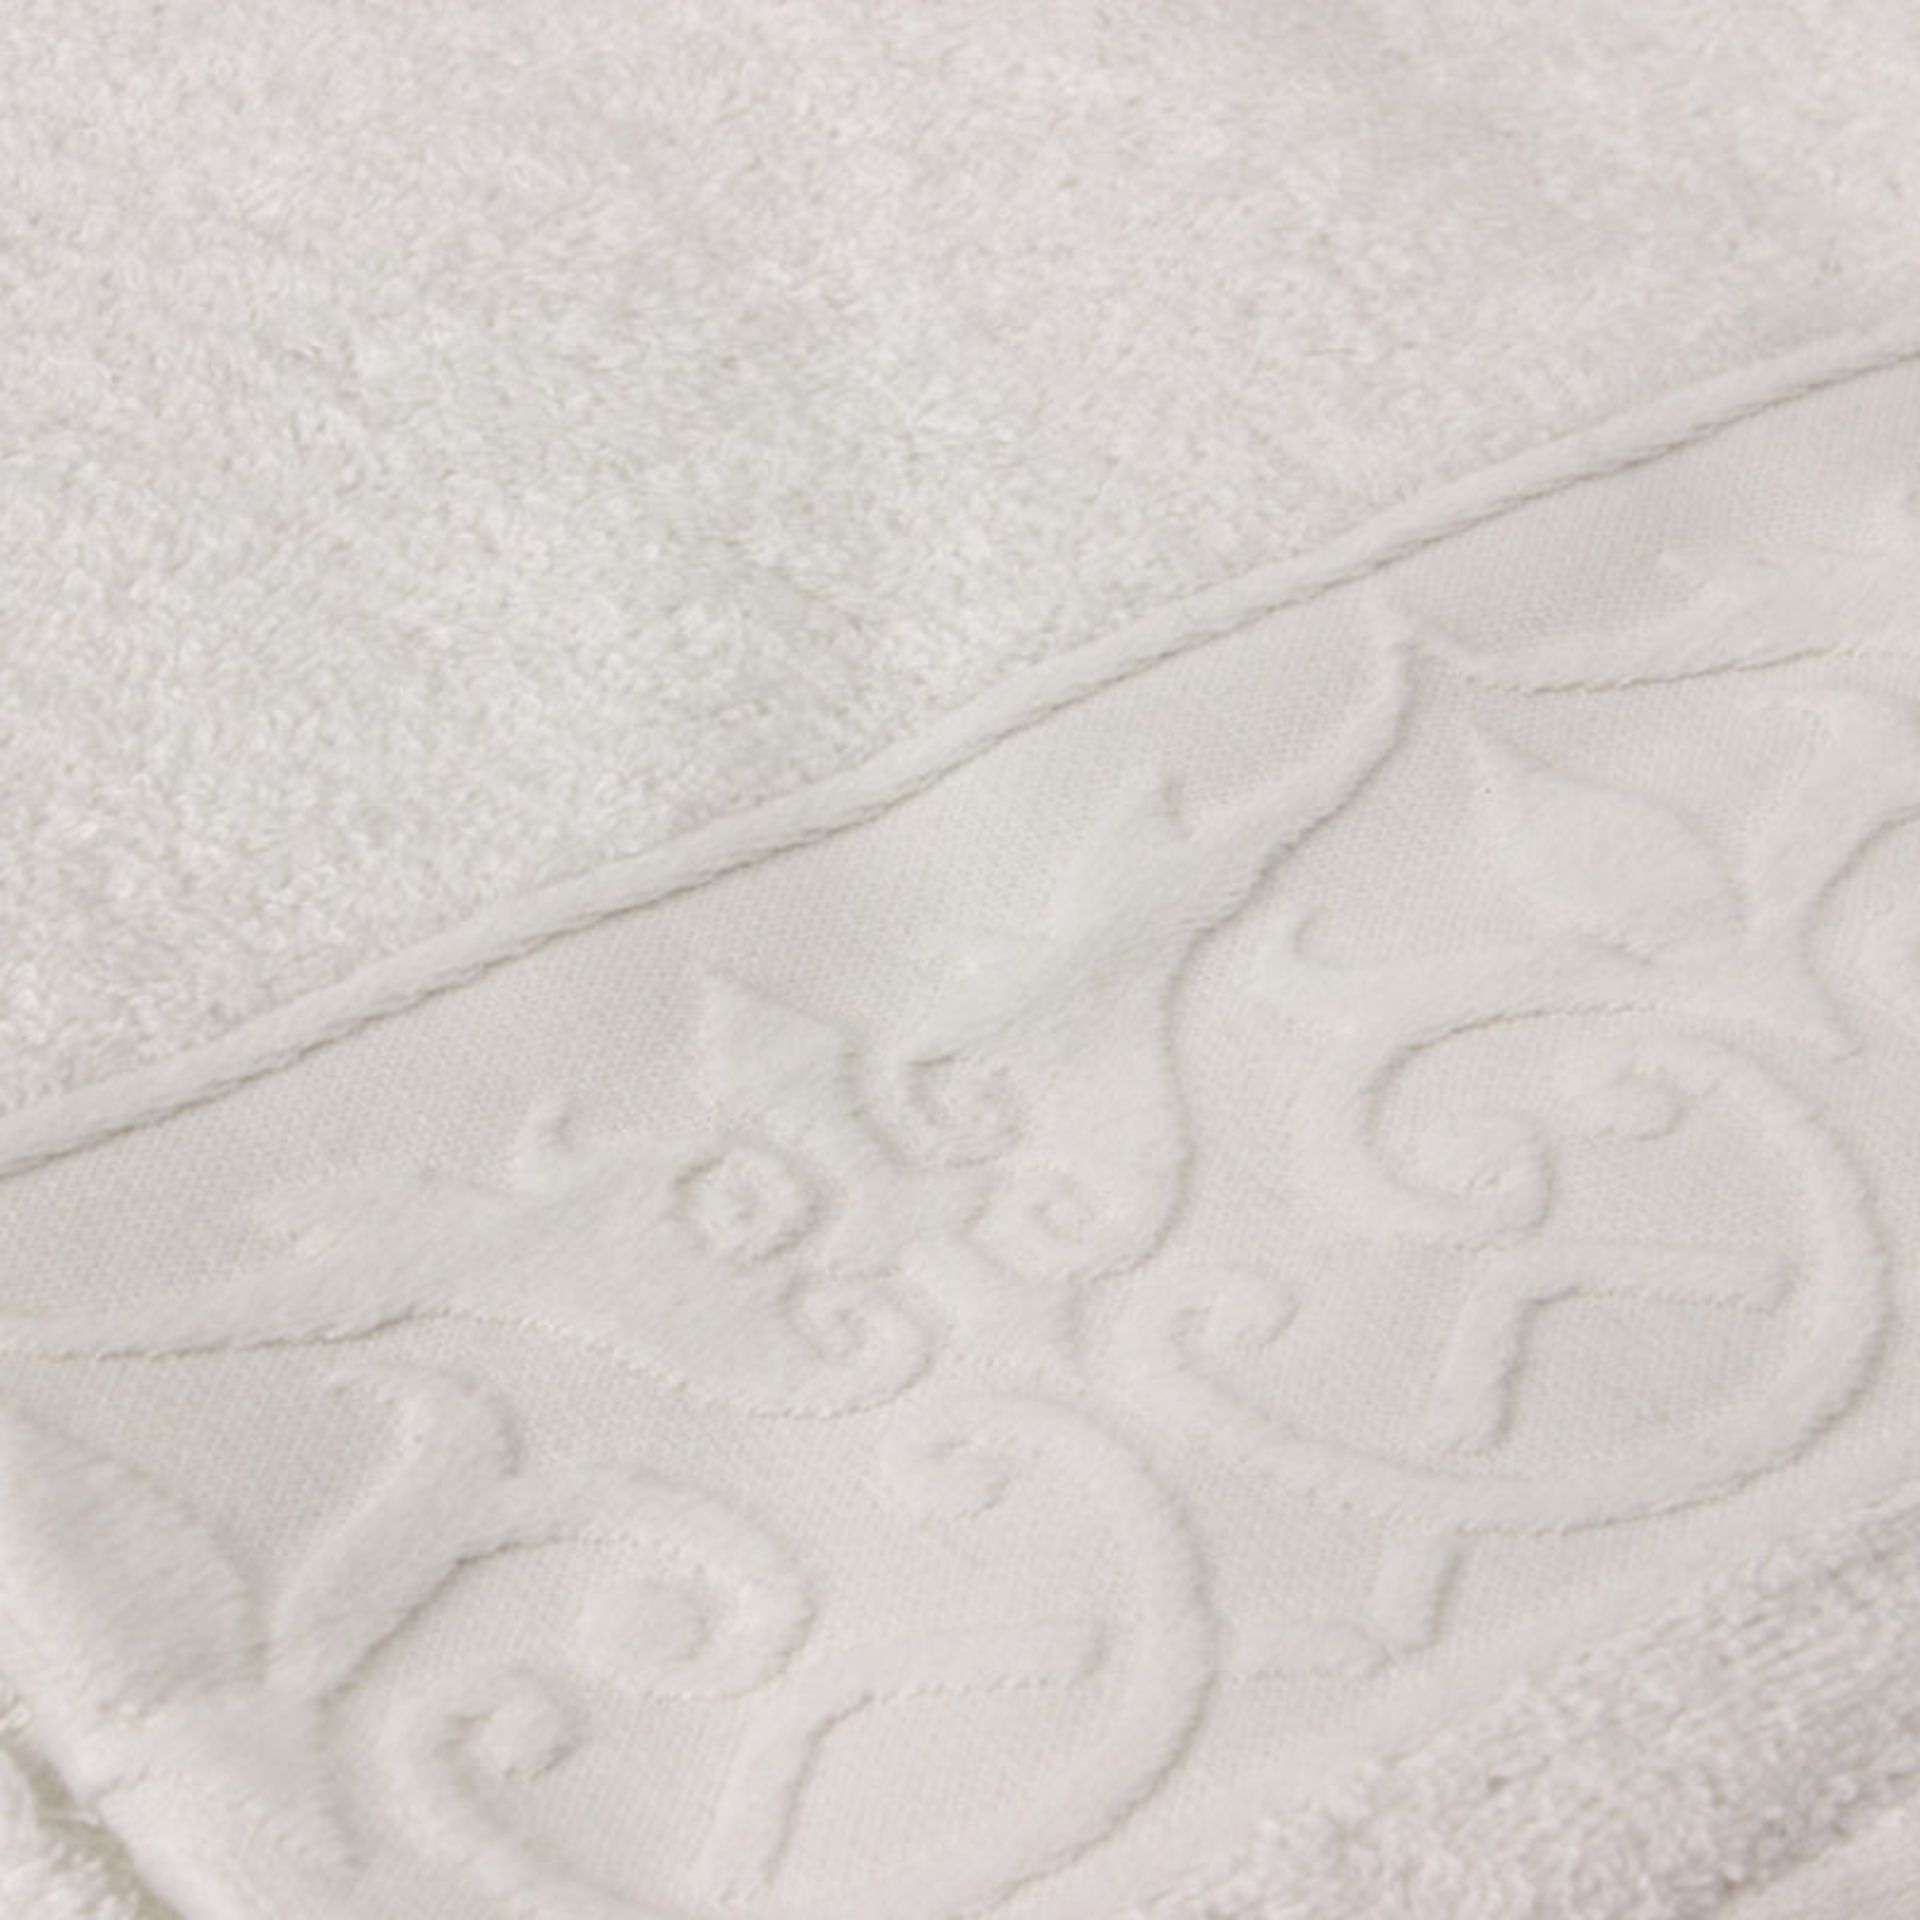 V *TRADE QTY* Brand New Frette Italian White Bath Towel With Embossed Pattern X 80 YOUR BID PRICE TO